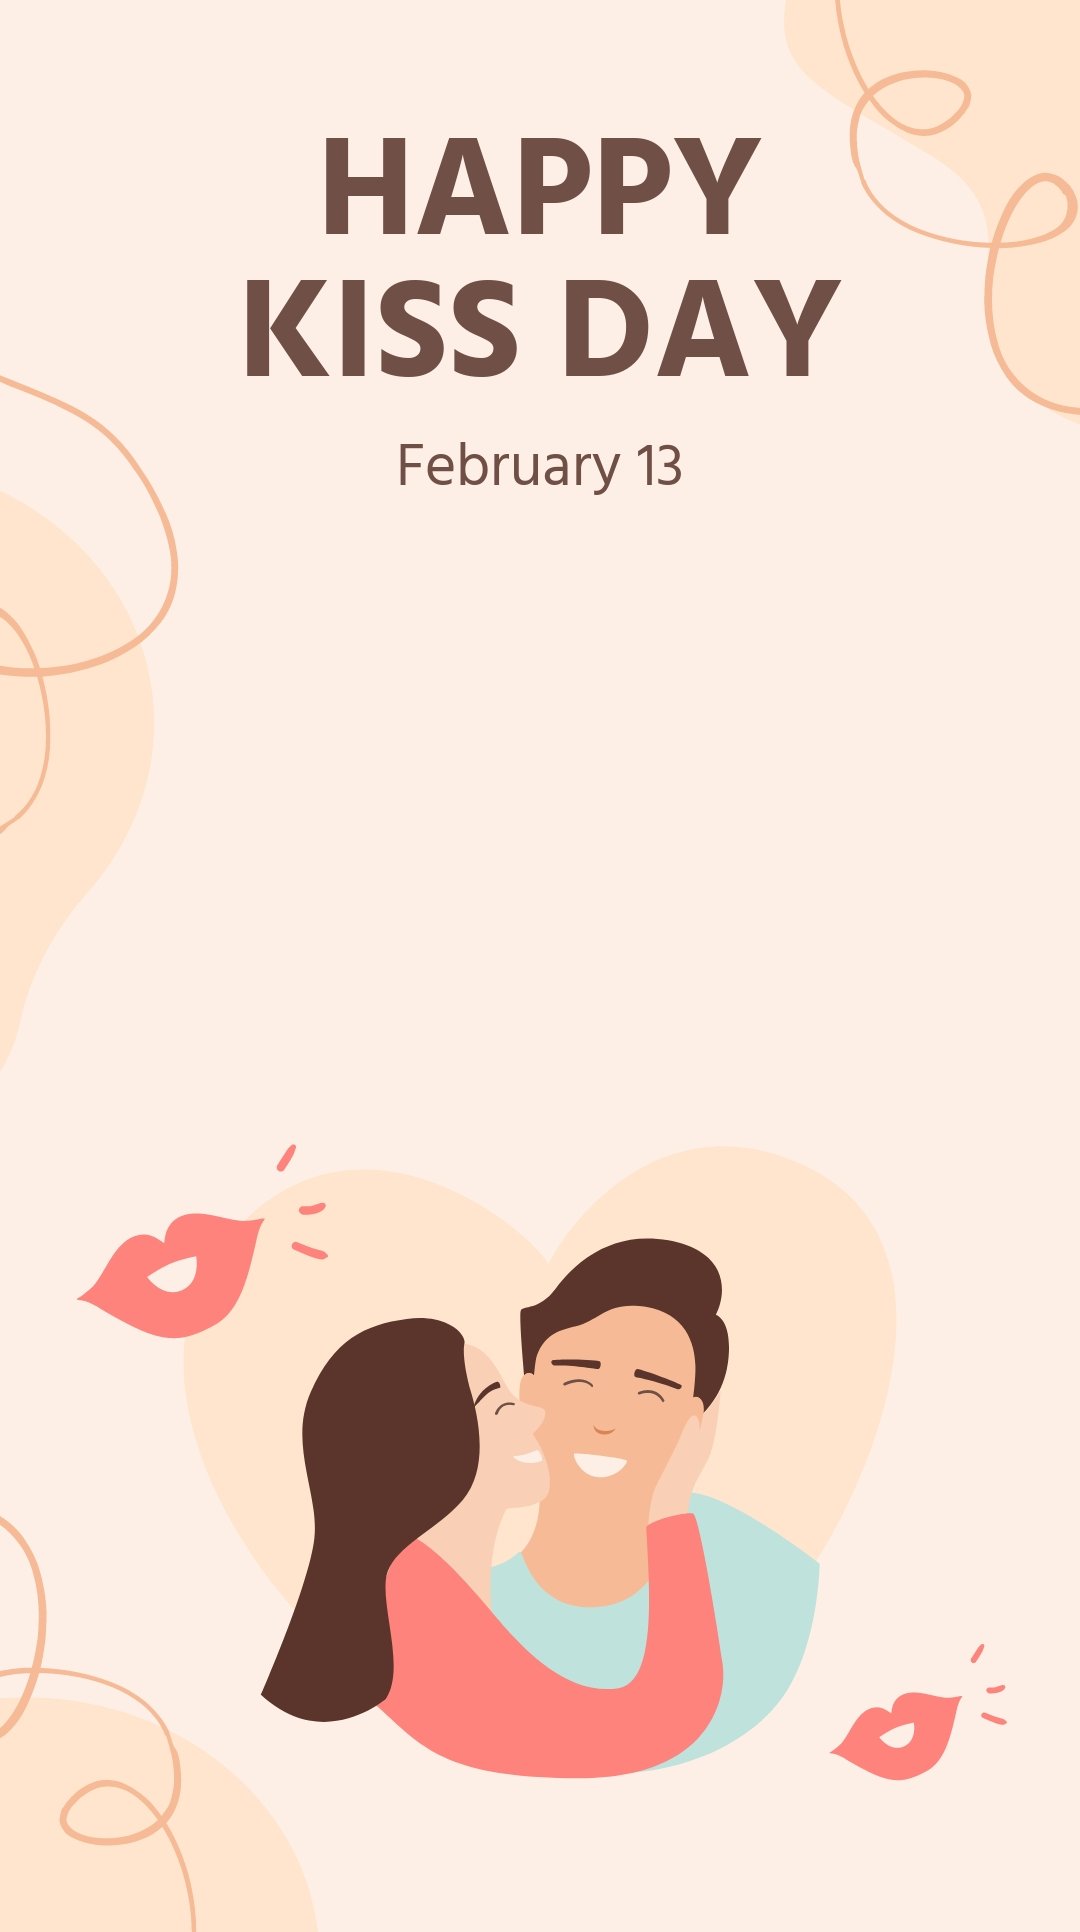 Happy Kiss Day Snapchat Geofilter Template